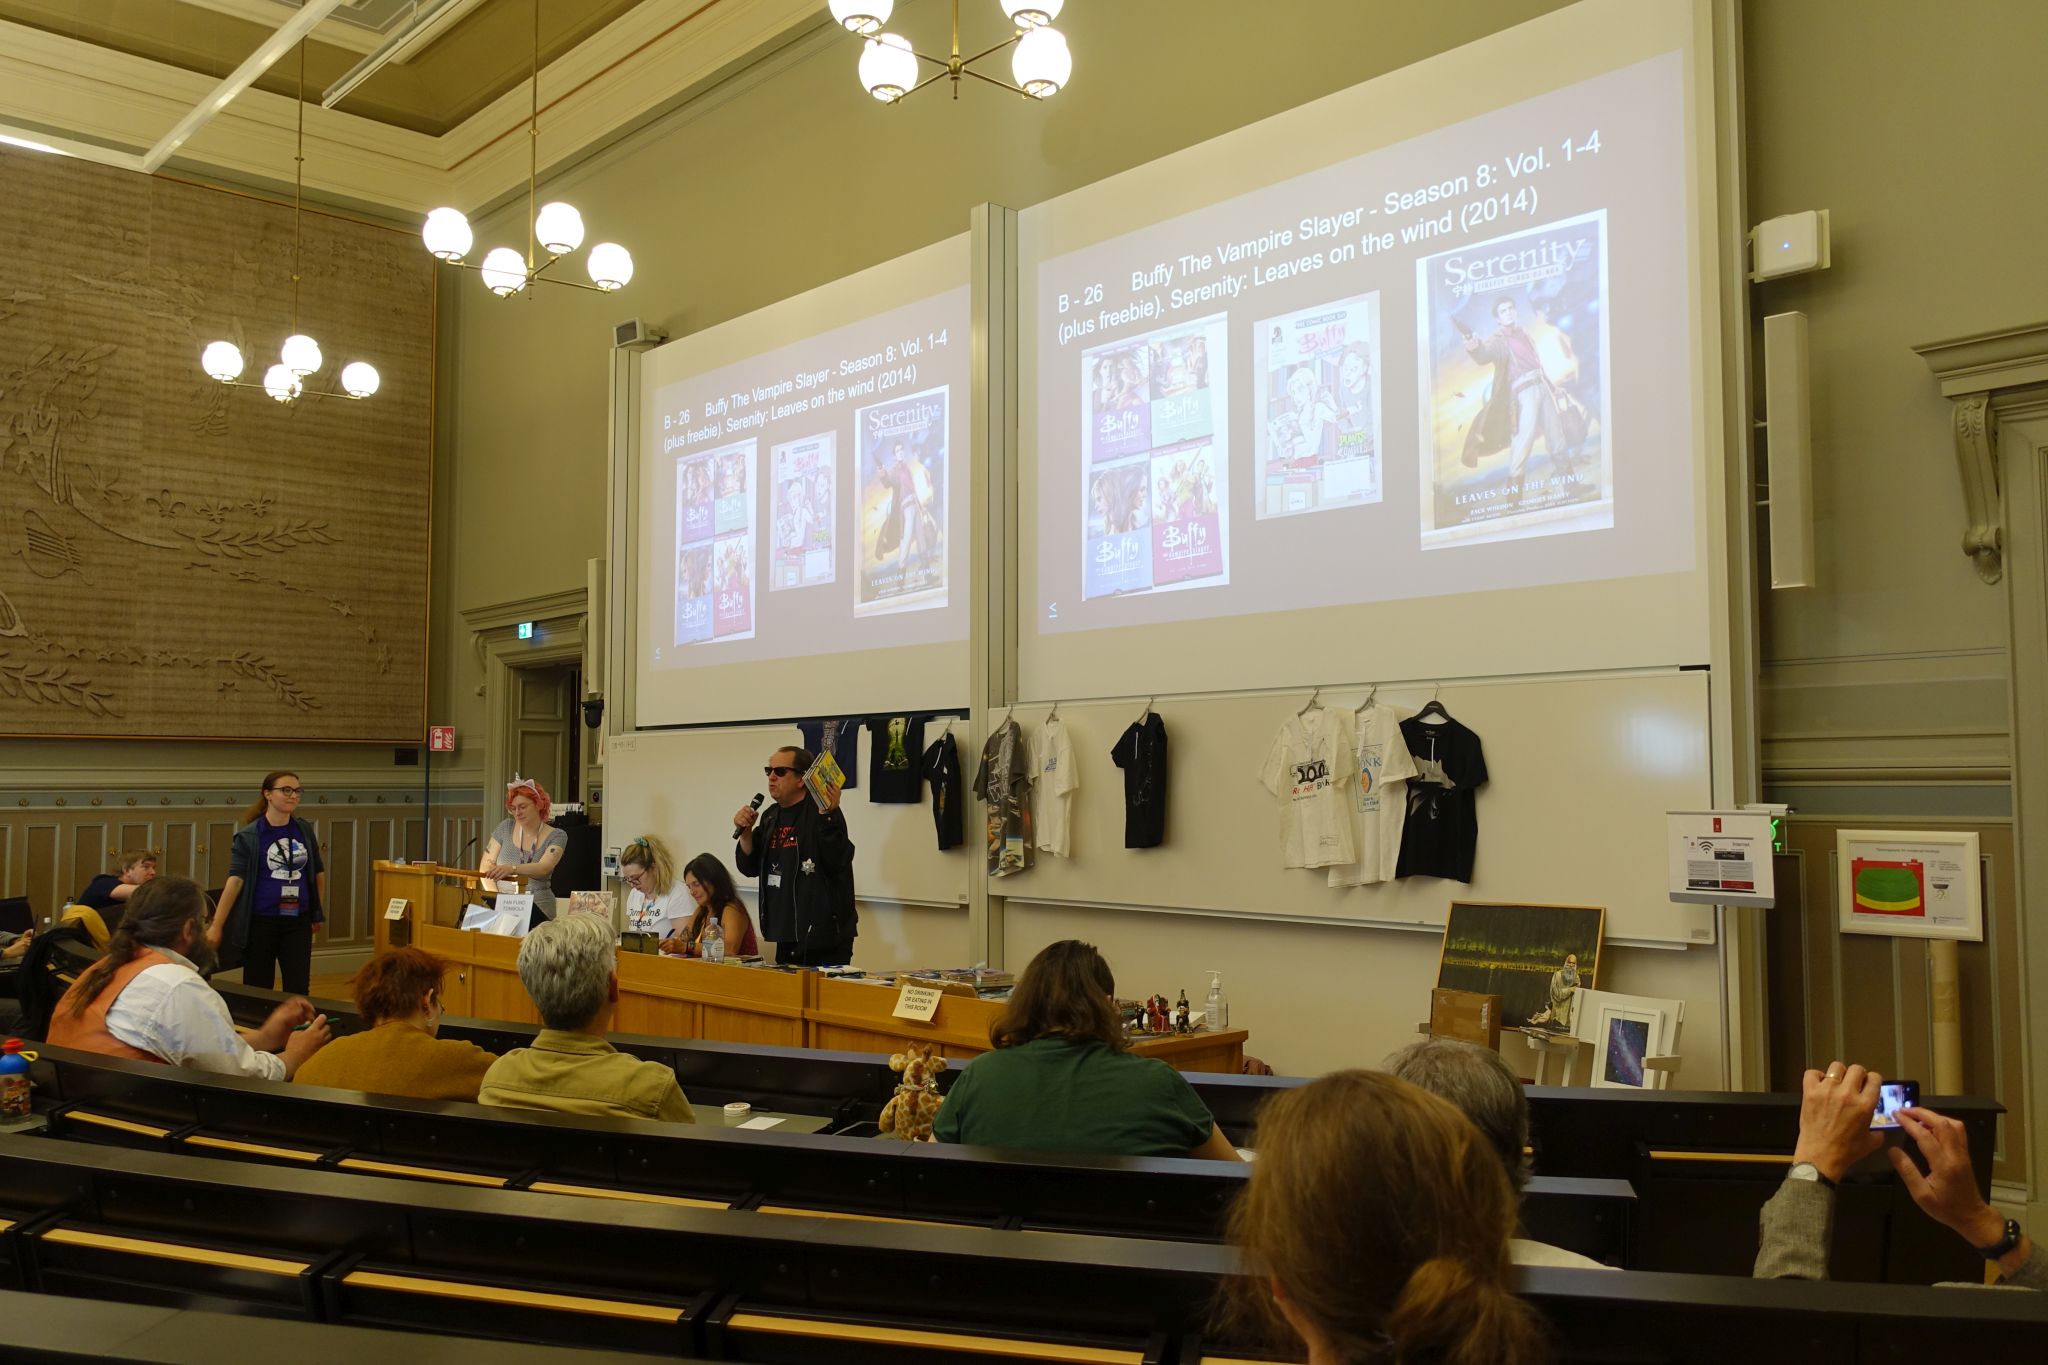 Picture taken in an auditorium style lecture hall. A few rows of seets are visible and some people are occupying chairs. On the middle of the picture there are few desks with people sitting and standing behind them. One person holds a microphone. behind them there are two screens with presentation showing some items on sale.